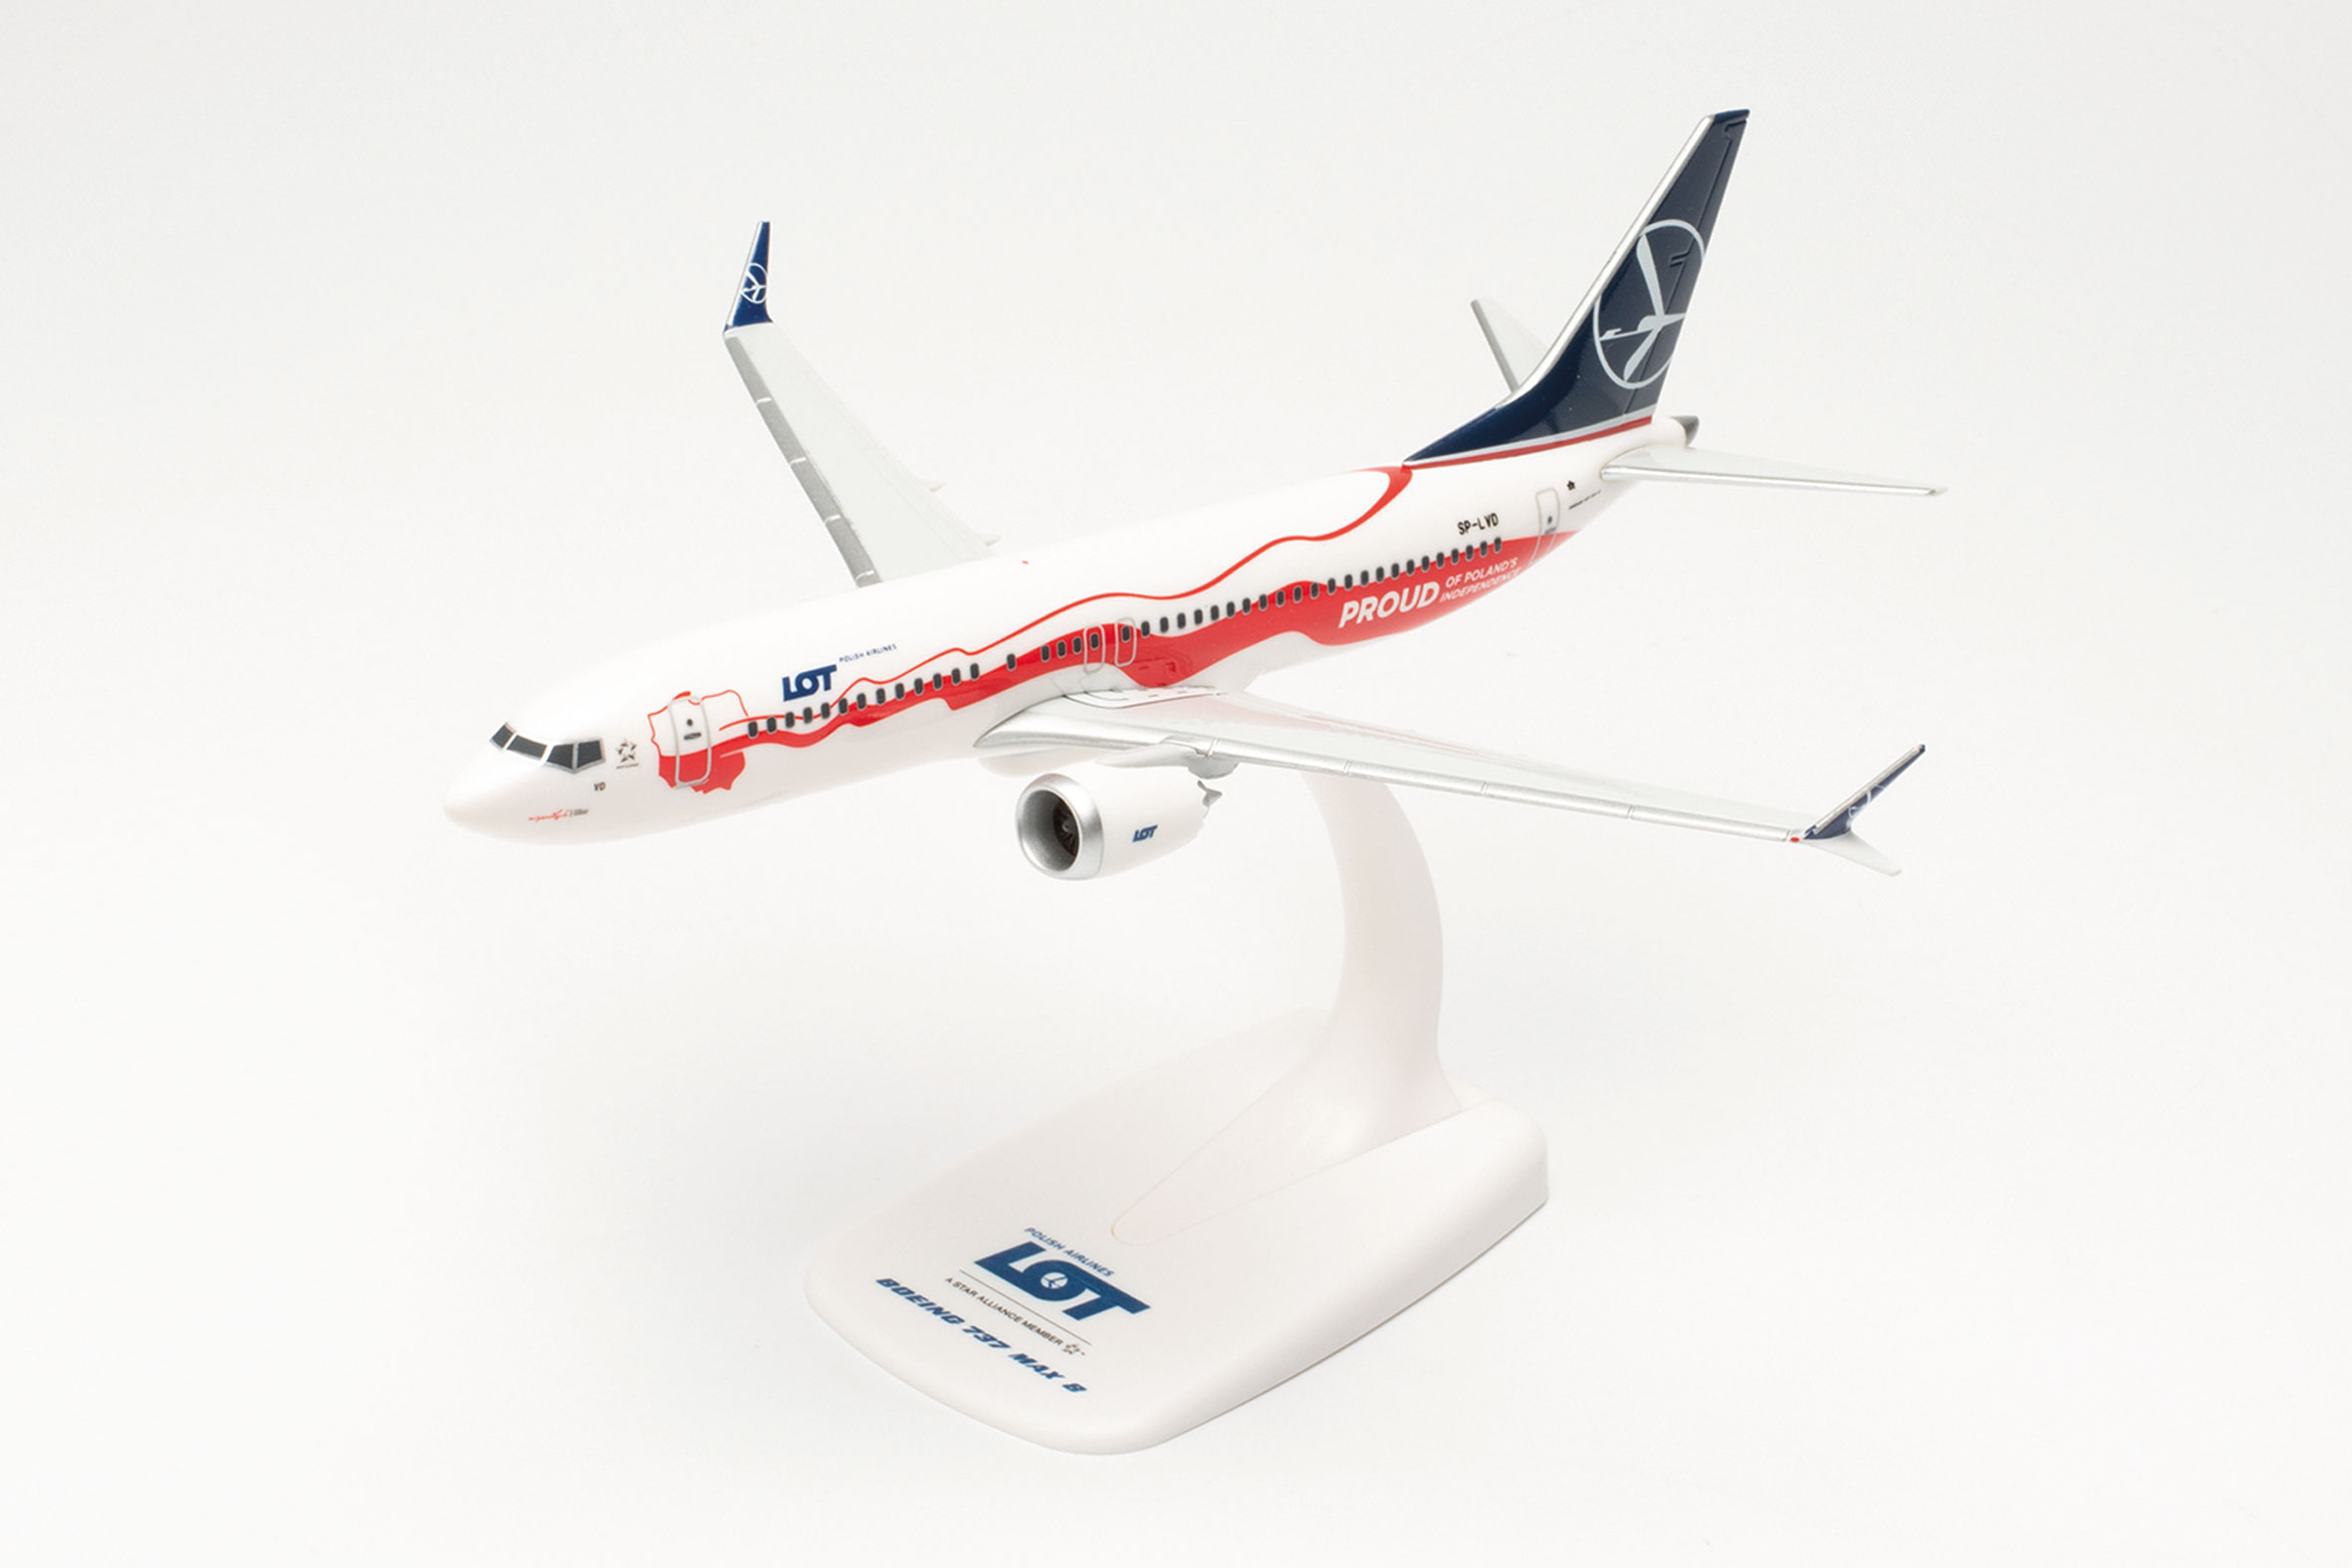 LOT Polish Airlines Boeing 737 Max 8 “Proud of Poland‘s Independence” – Reg.: SP-LVD